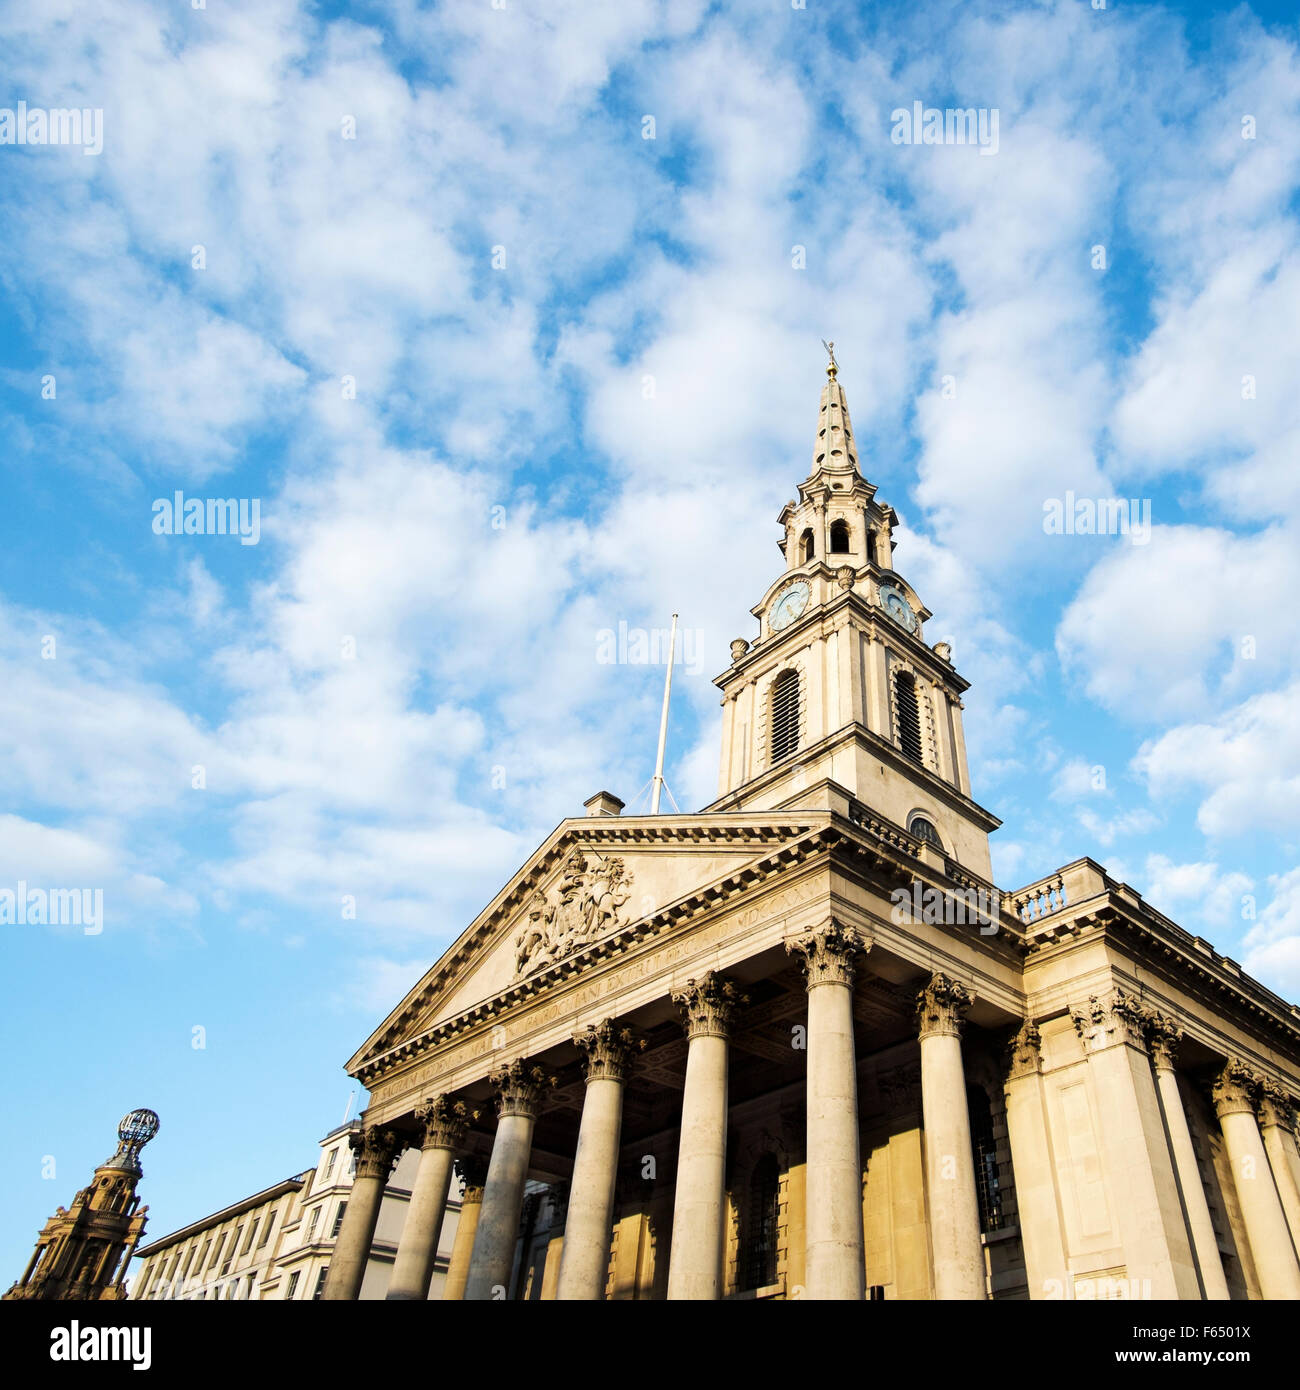 Looking up at the facade of St Martins-in-the-Fields, Trafalgar Square, London, England, UK Stock Photo